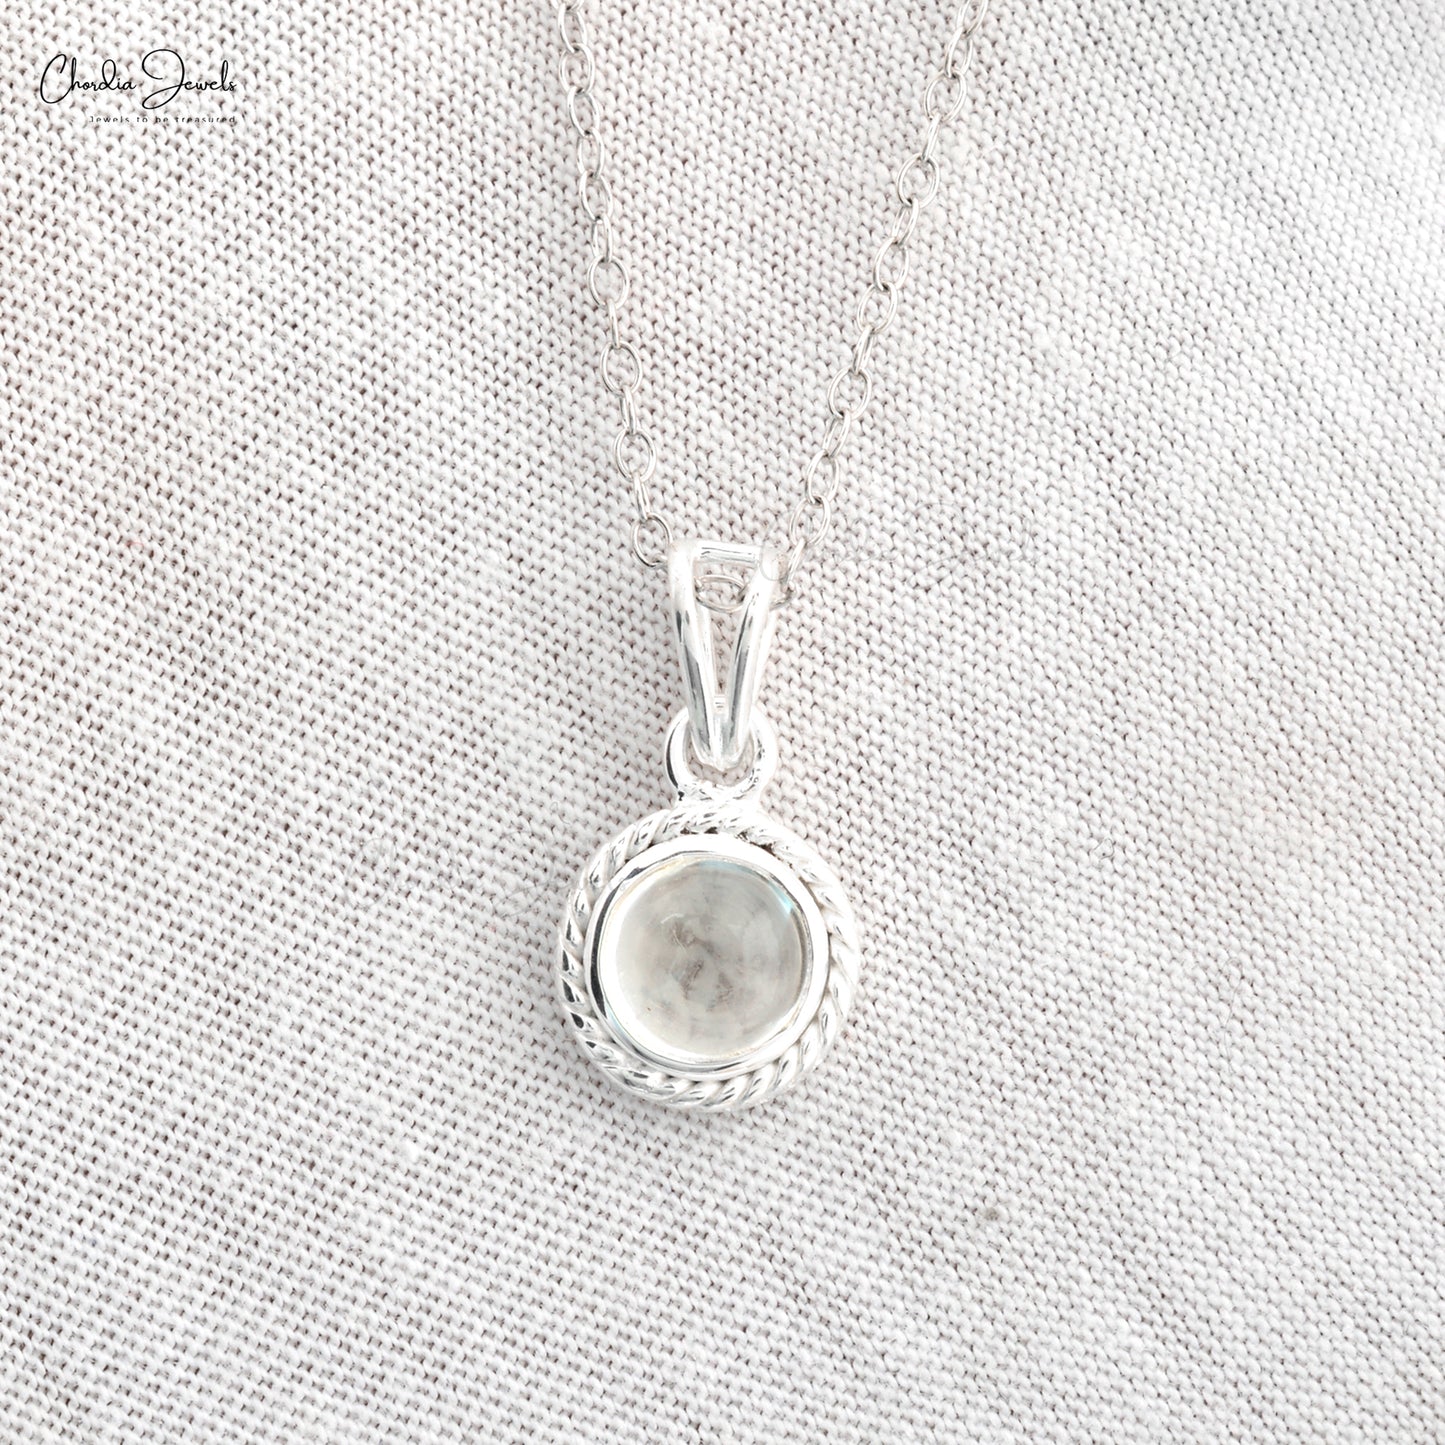 Genuine White Topaz Gemstone Pendant 925 Sterling Silver Pendant Necklace For Women Handmade Gemstone Jewelry At Discount Price